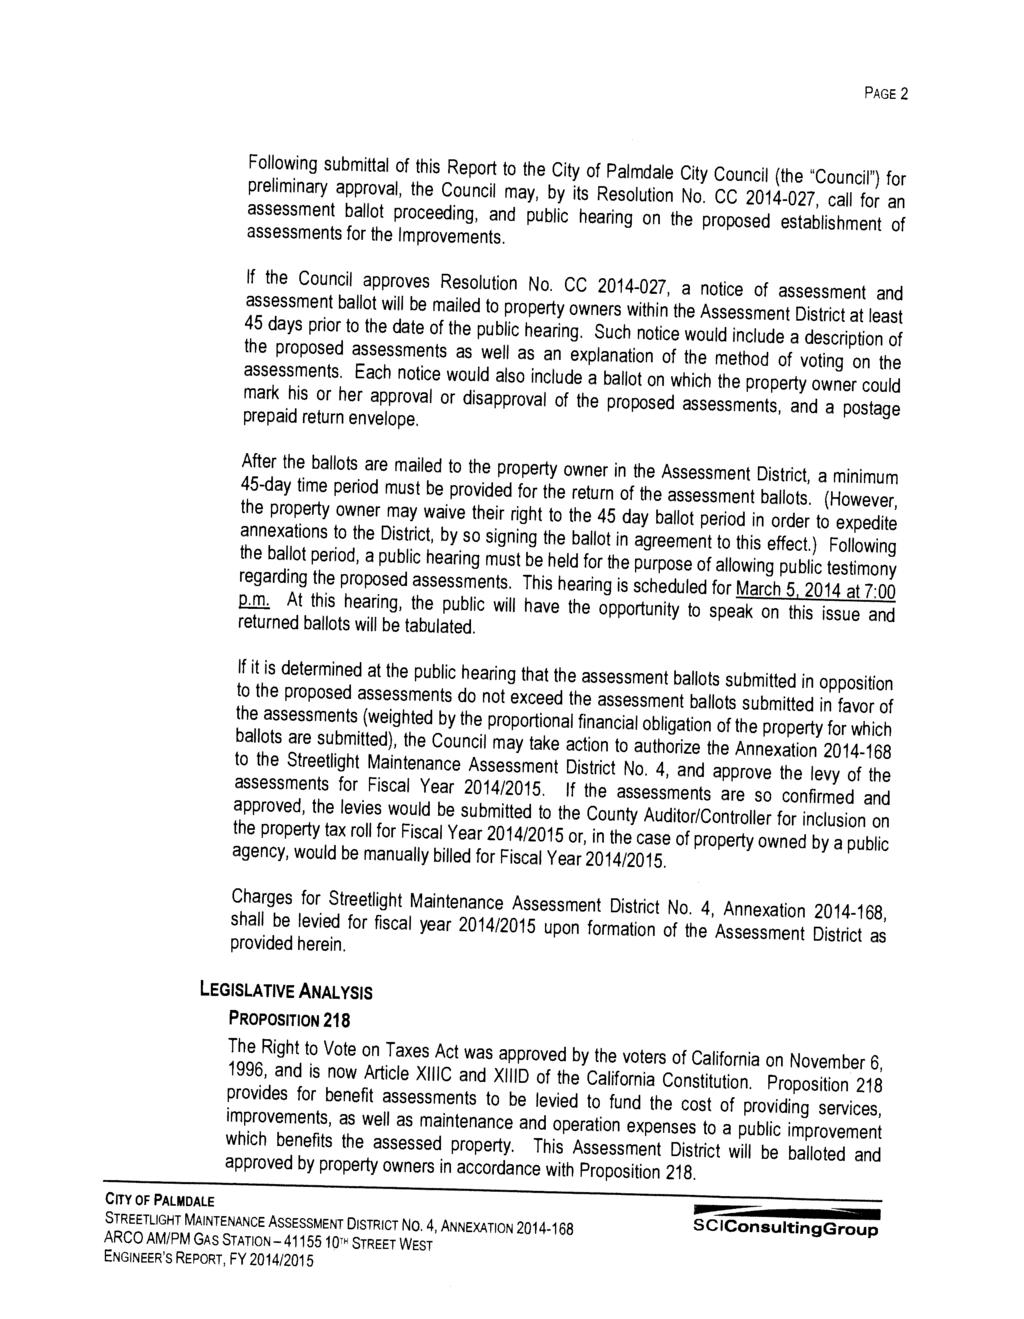 PAGE 2 Following submittal of this Report to the City of Palmdale City Council (the "Council") for preliminary approval, the Council may, by its Resolution No.